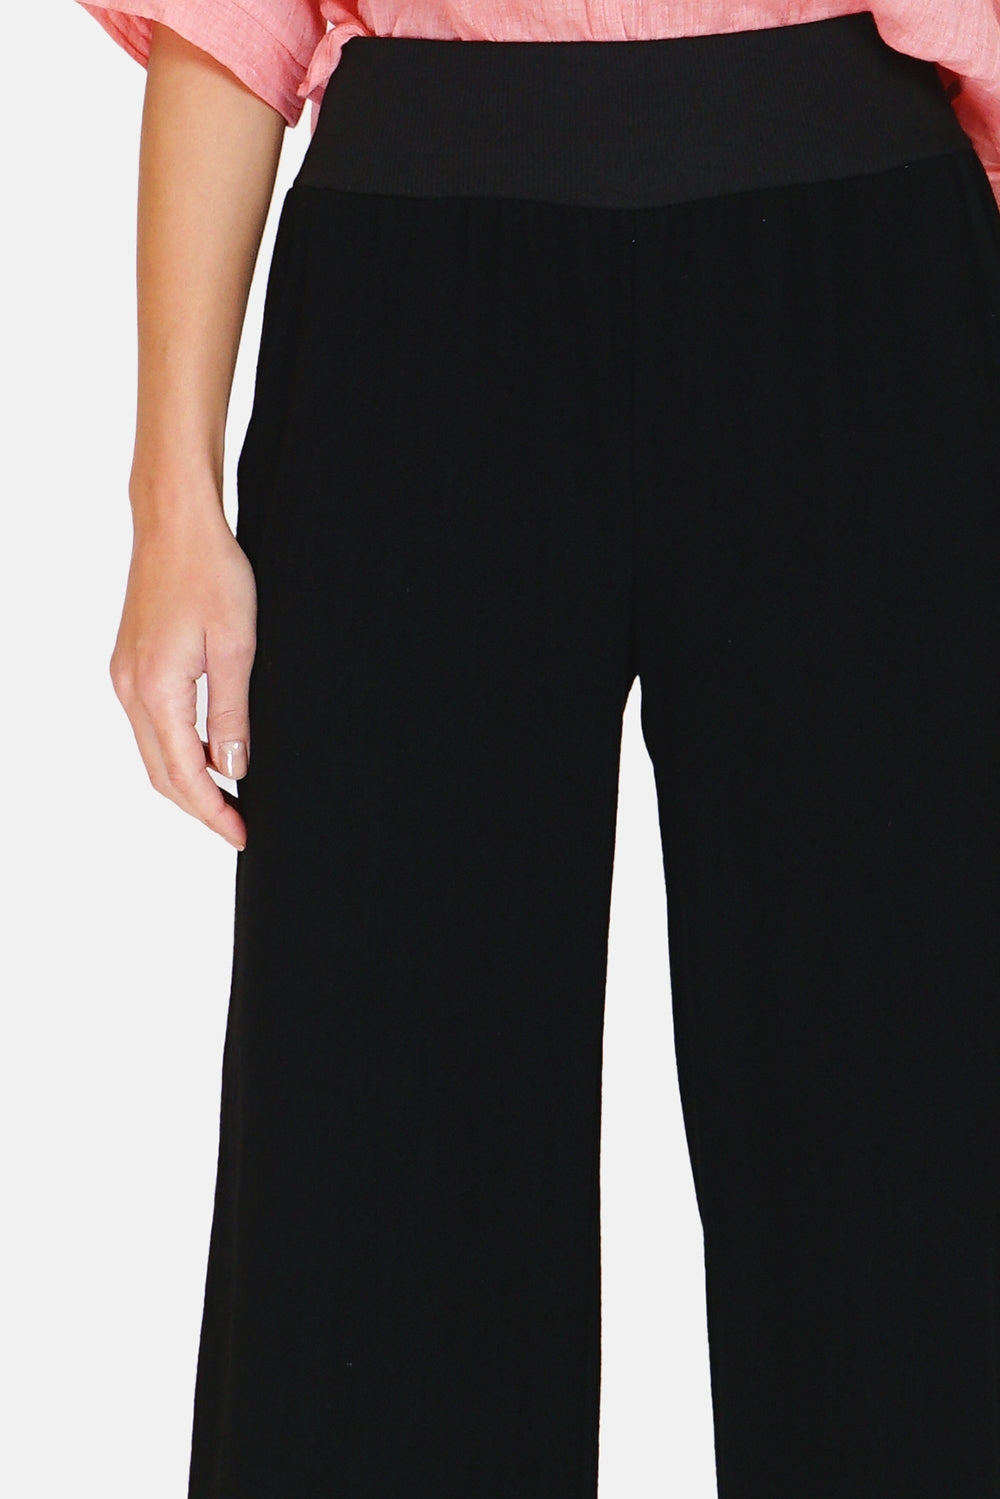 High-waisted straight-cut pants with side pockets